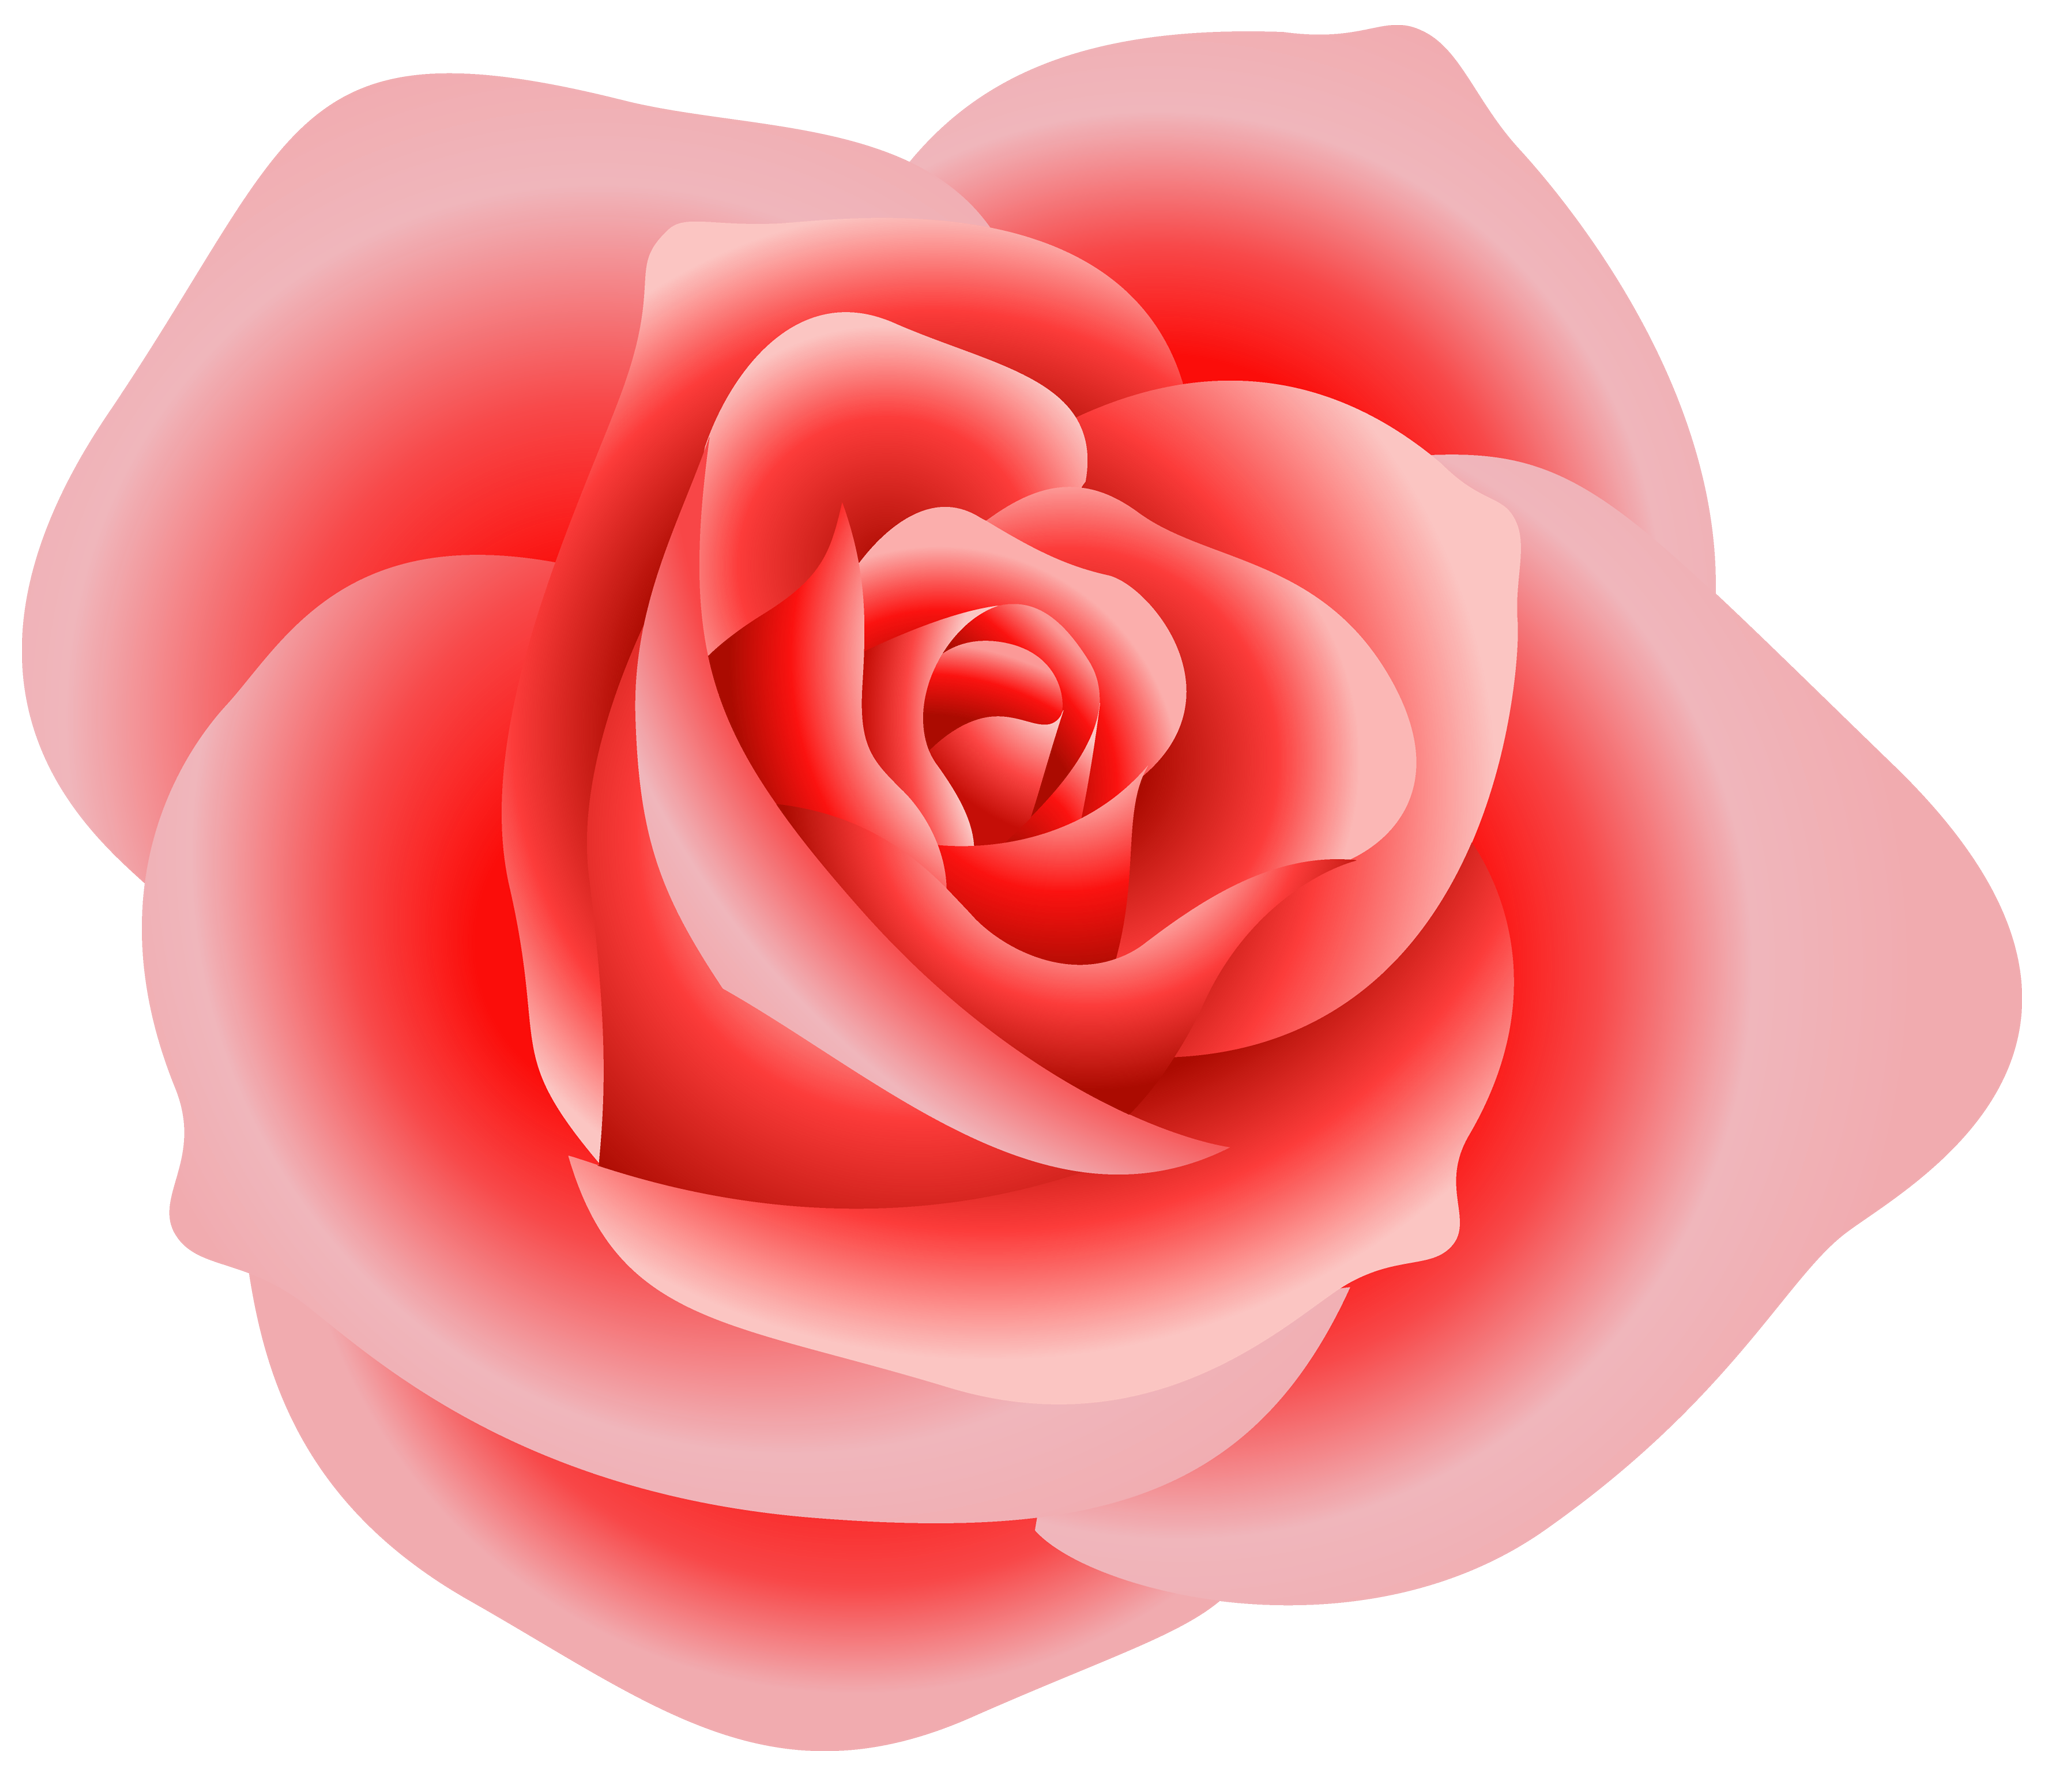 Roses rose clip art vector images